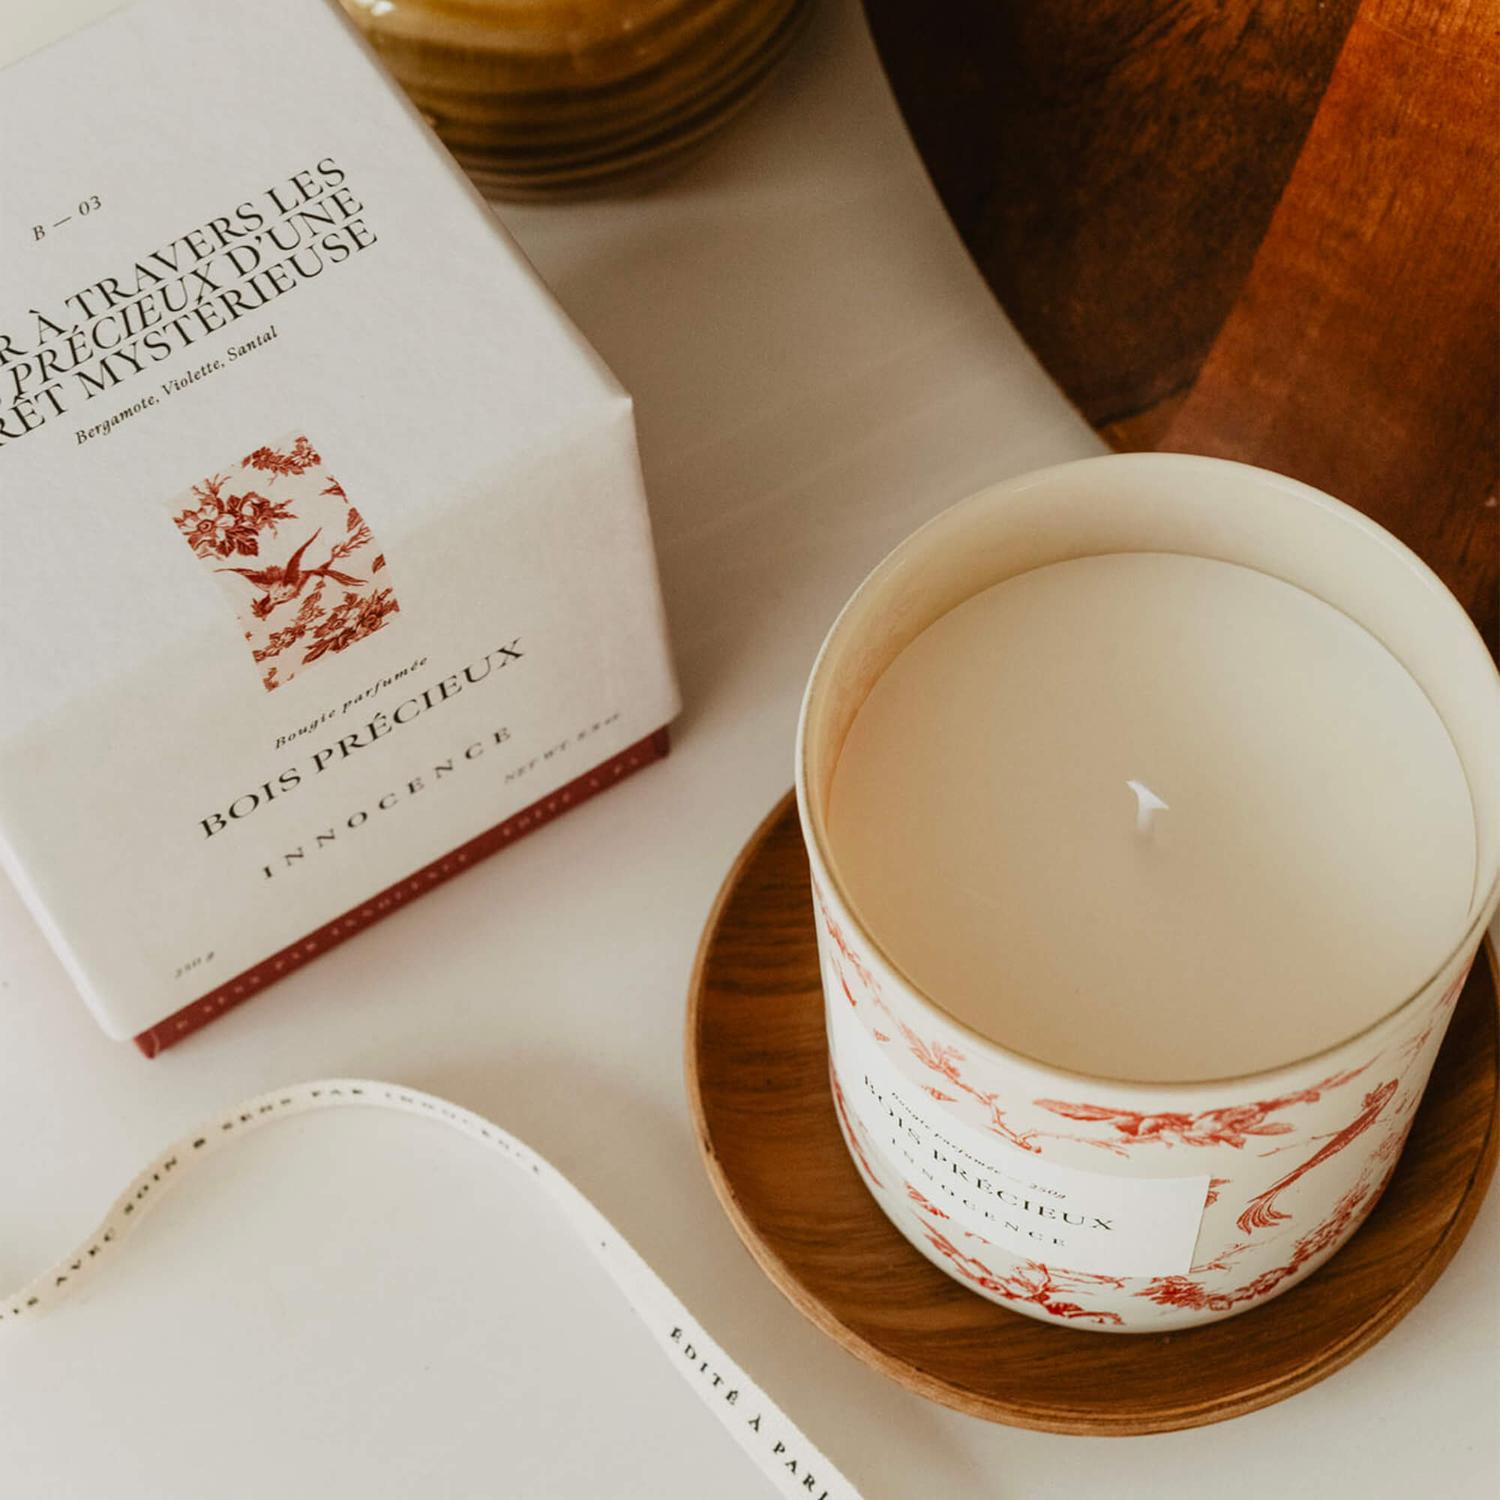 Innocence - Précieux souvenirs - The scented candle